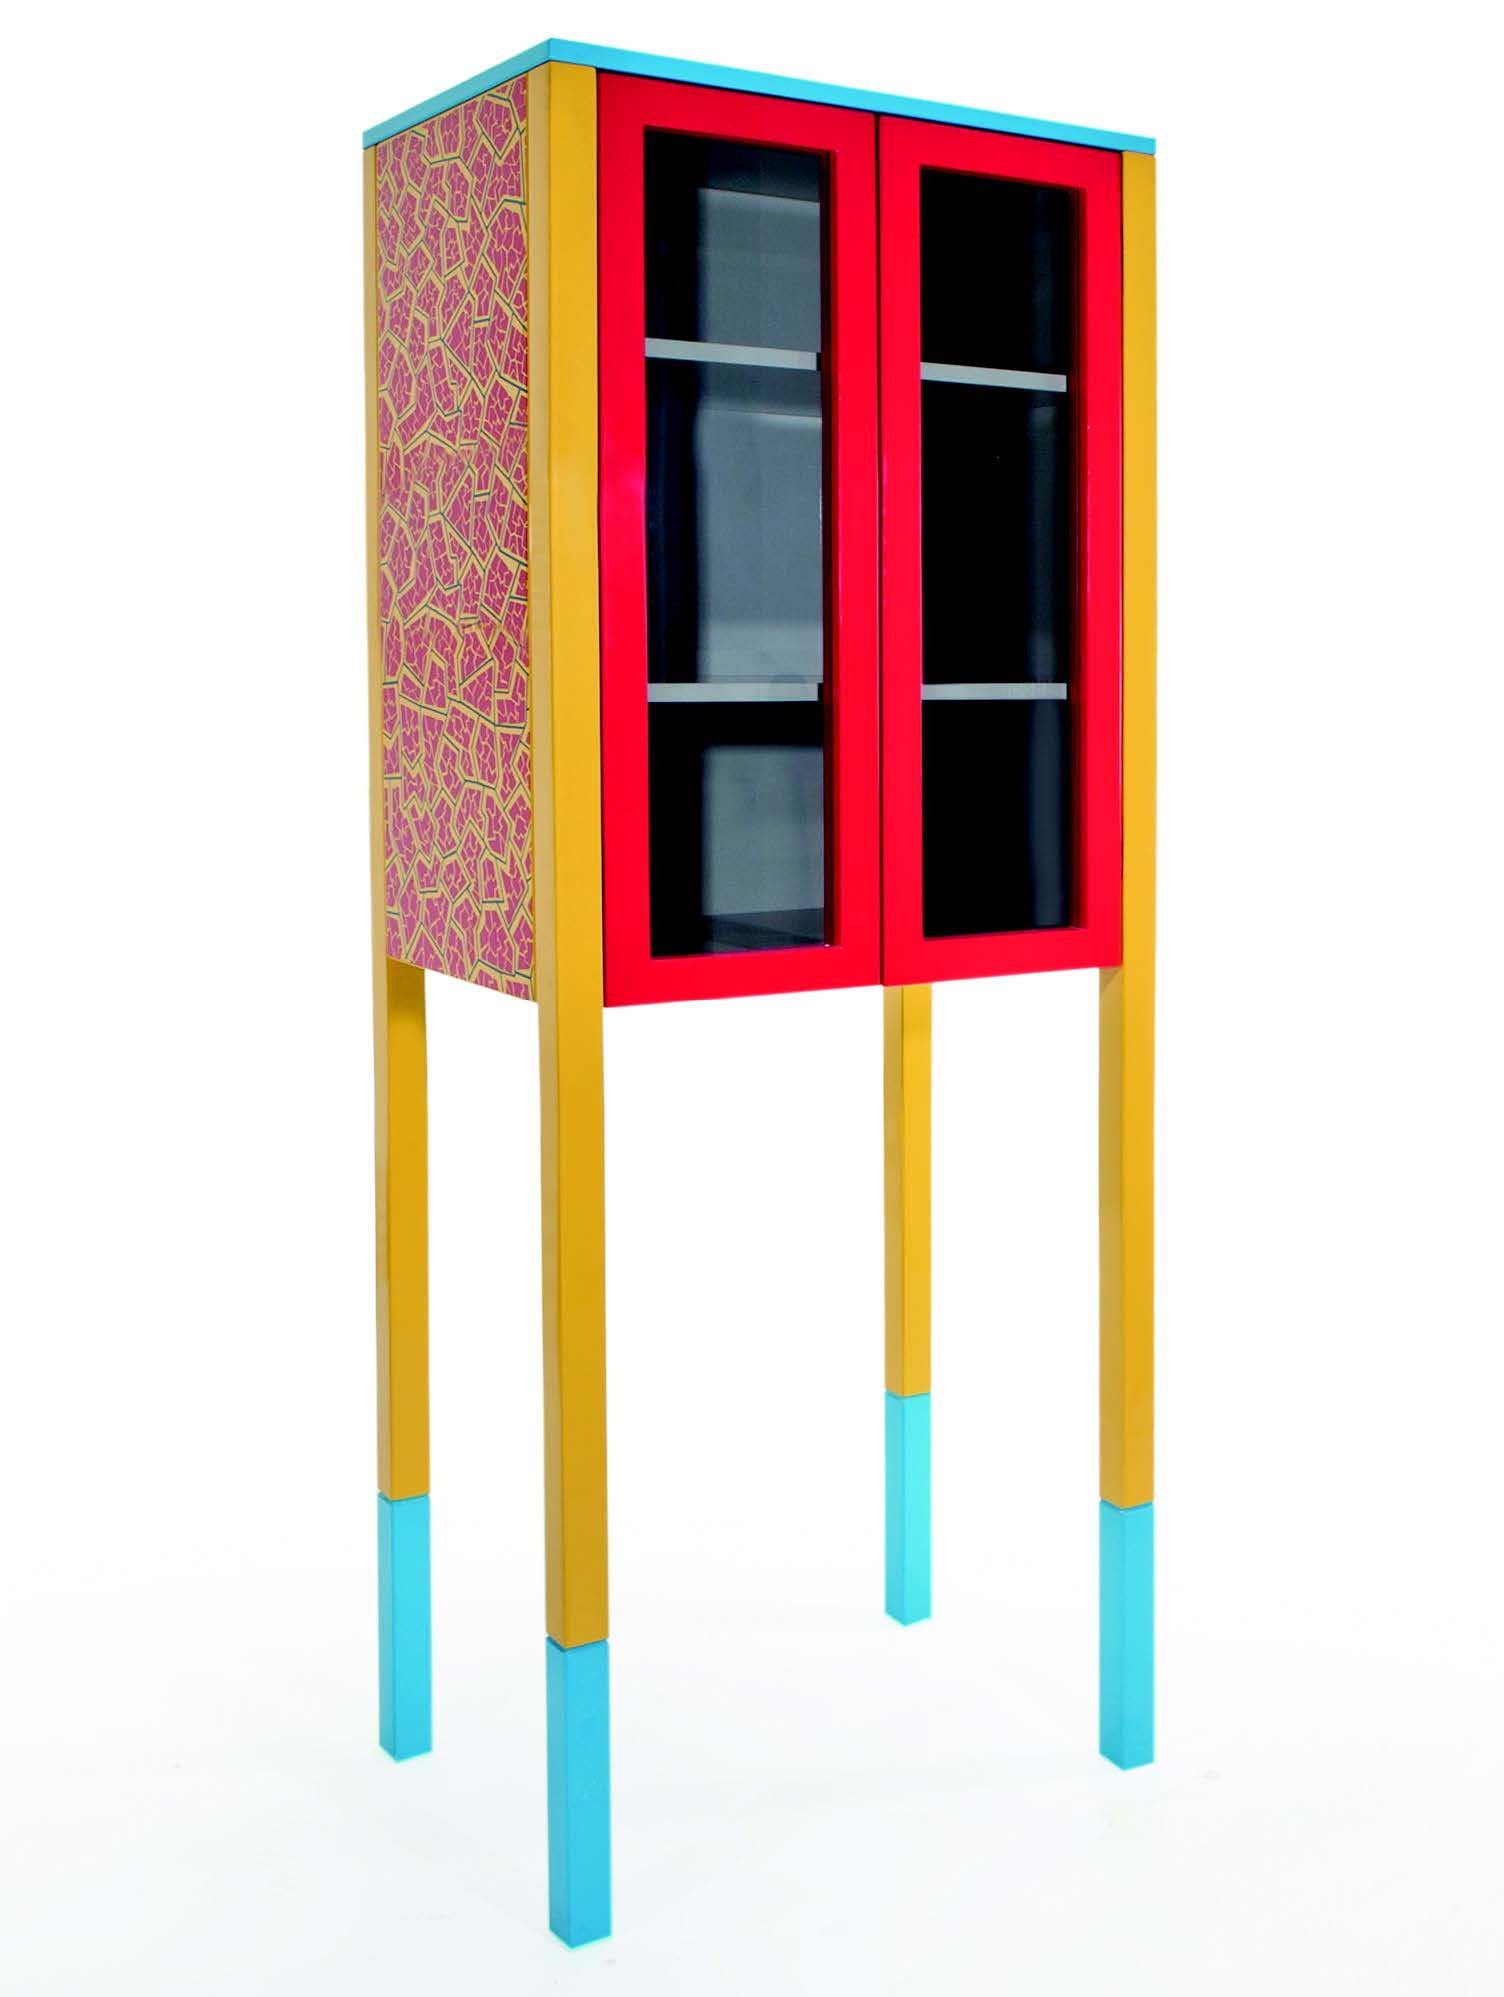 D’Antibes cabinet by George J. Sowden of the Memphis Group